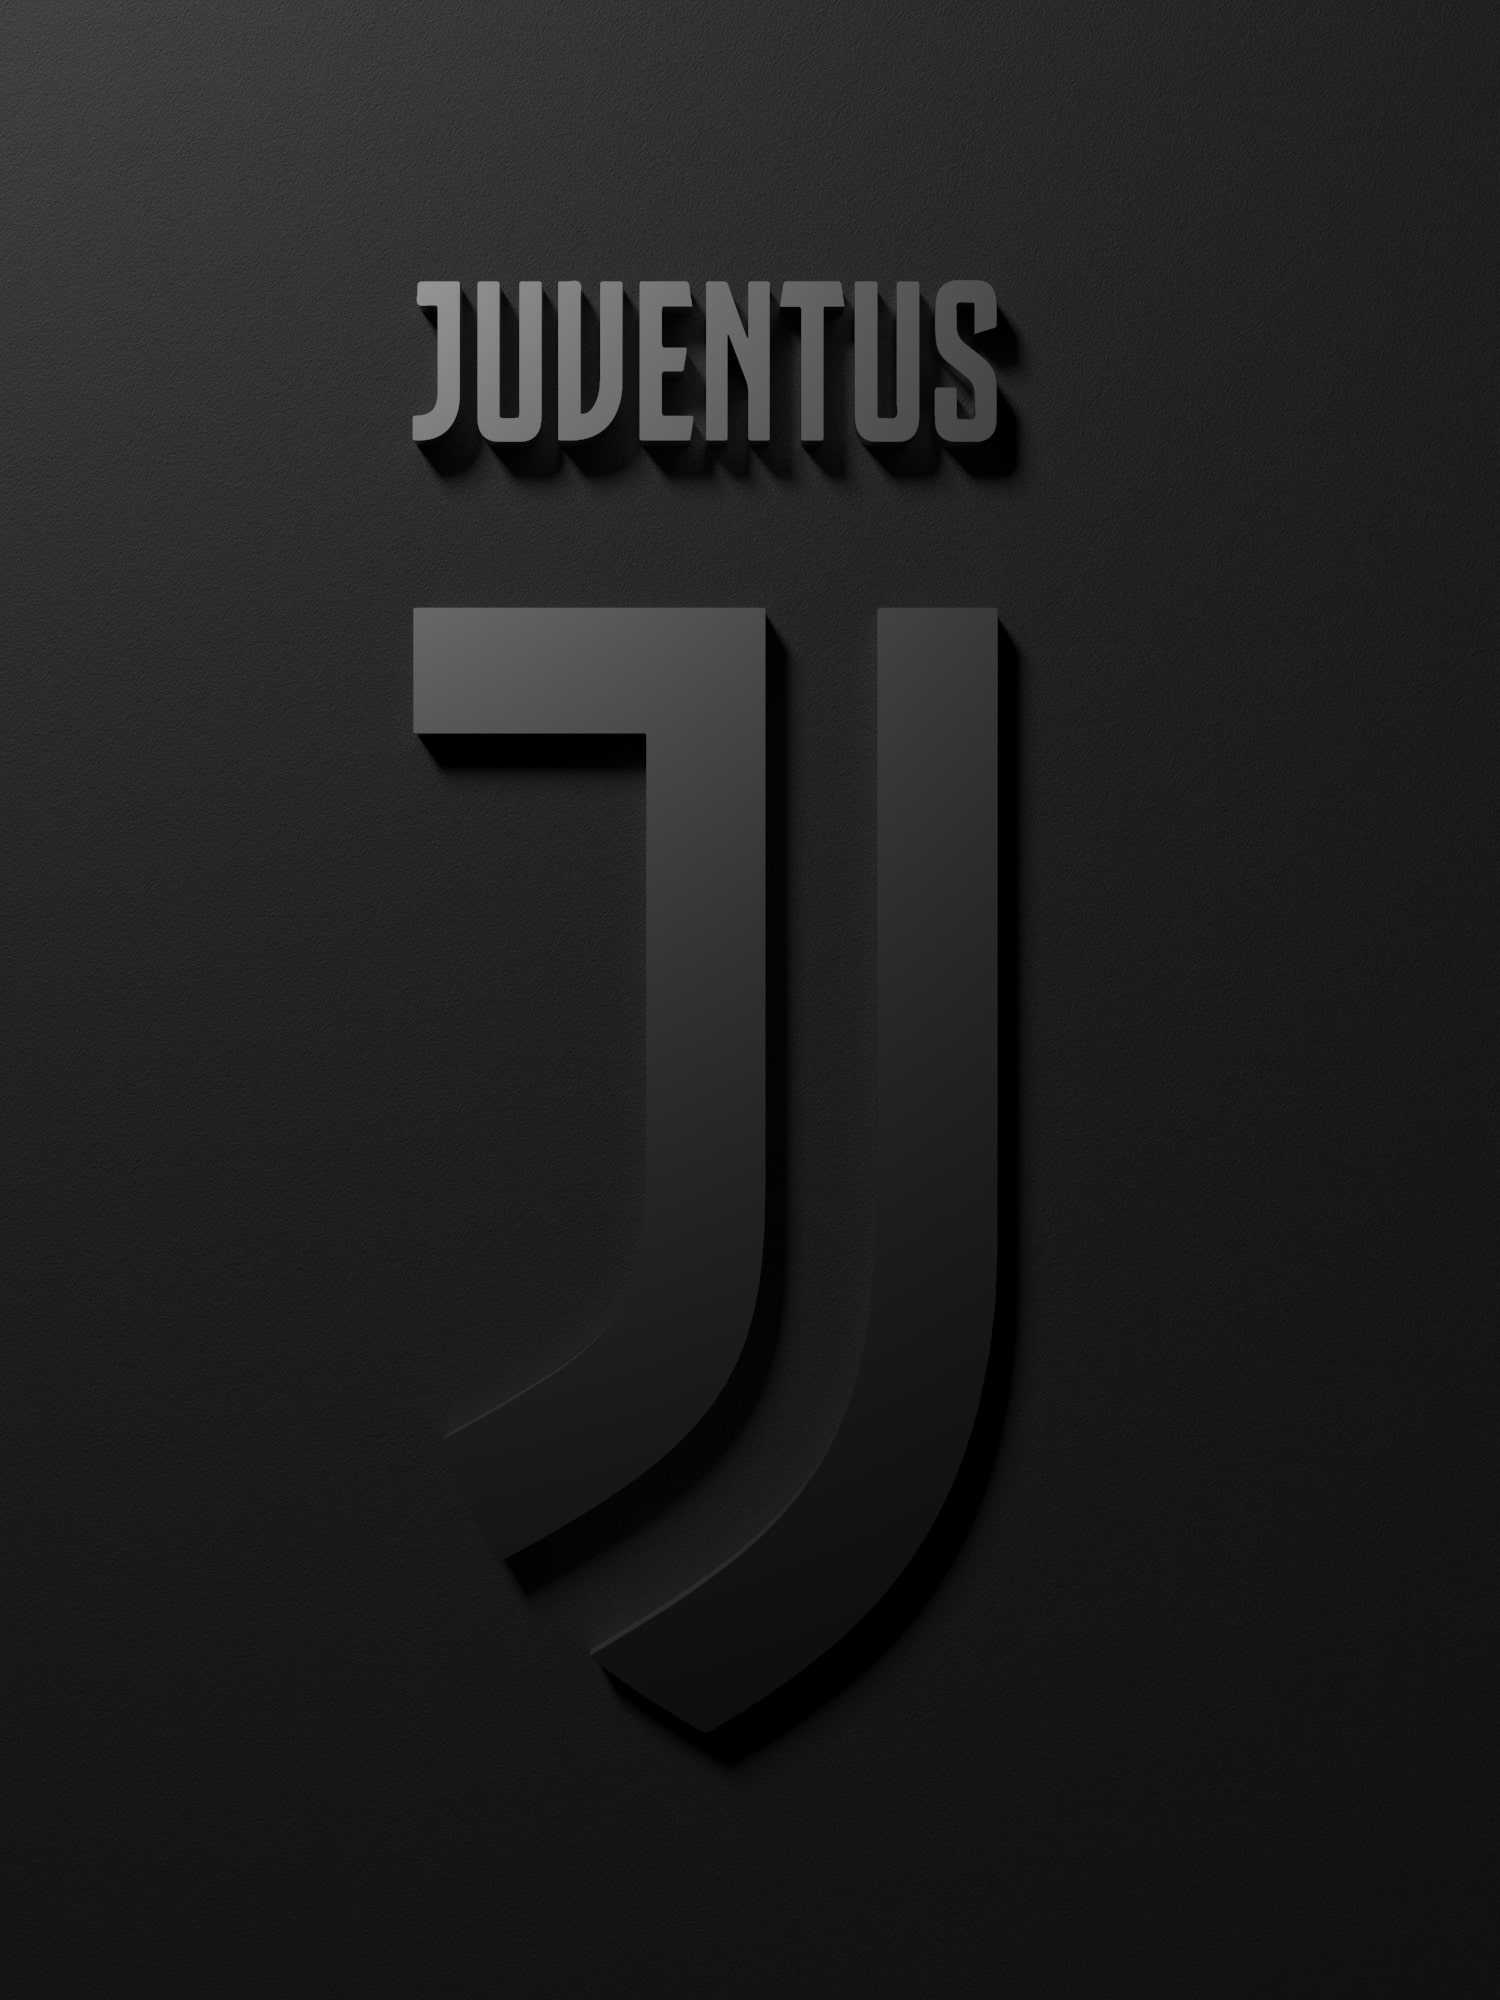 Juventus Logo, Vibrant wallpapers, Free HD images, Soccer team, 1500x2000 HD Handy